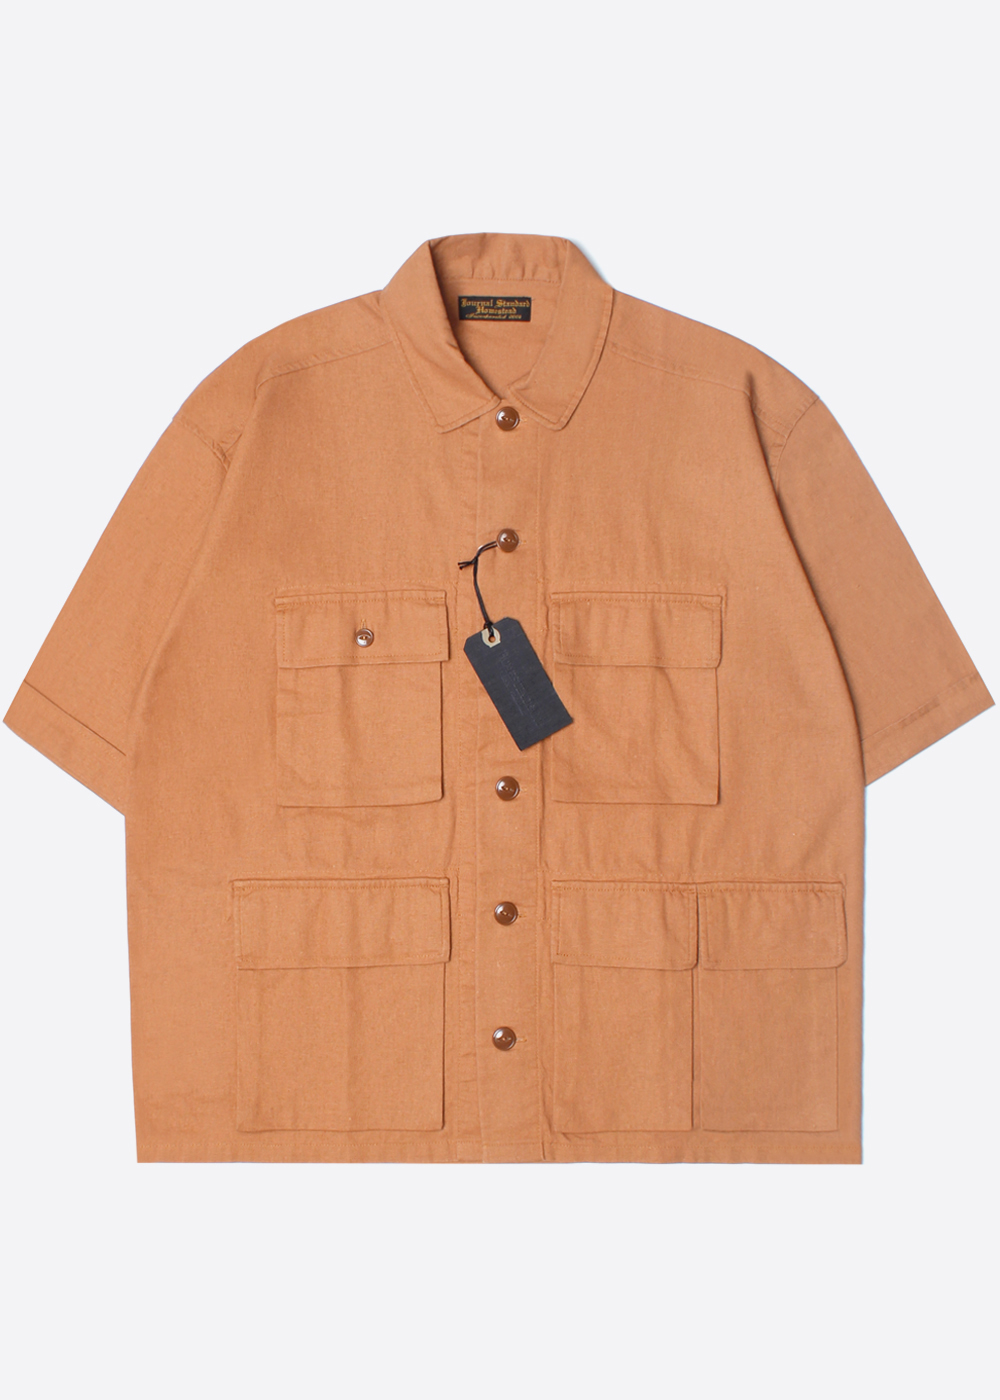 HOMESTEAD BY JOURNAL STANDARD’over fit’linen hunting jacket shirt